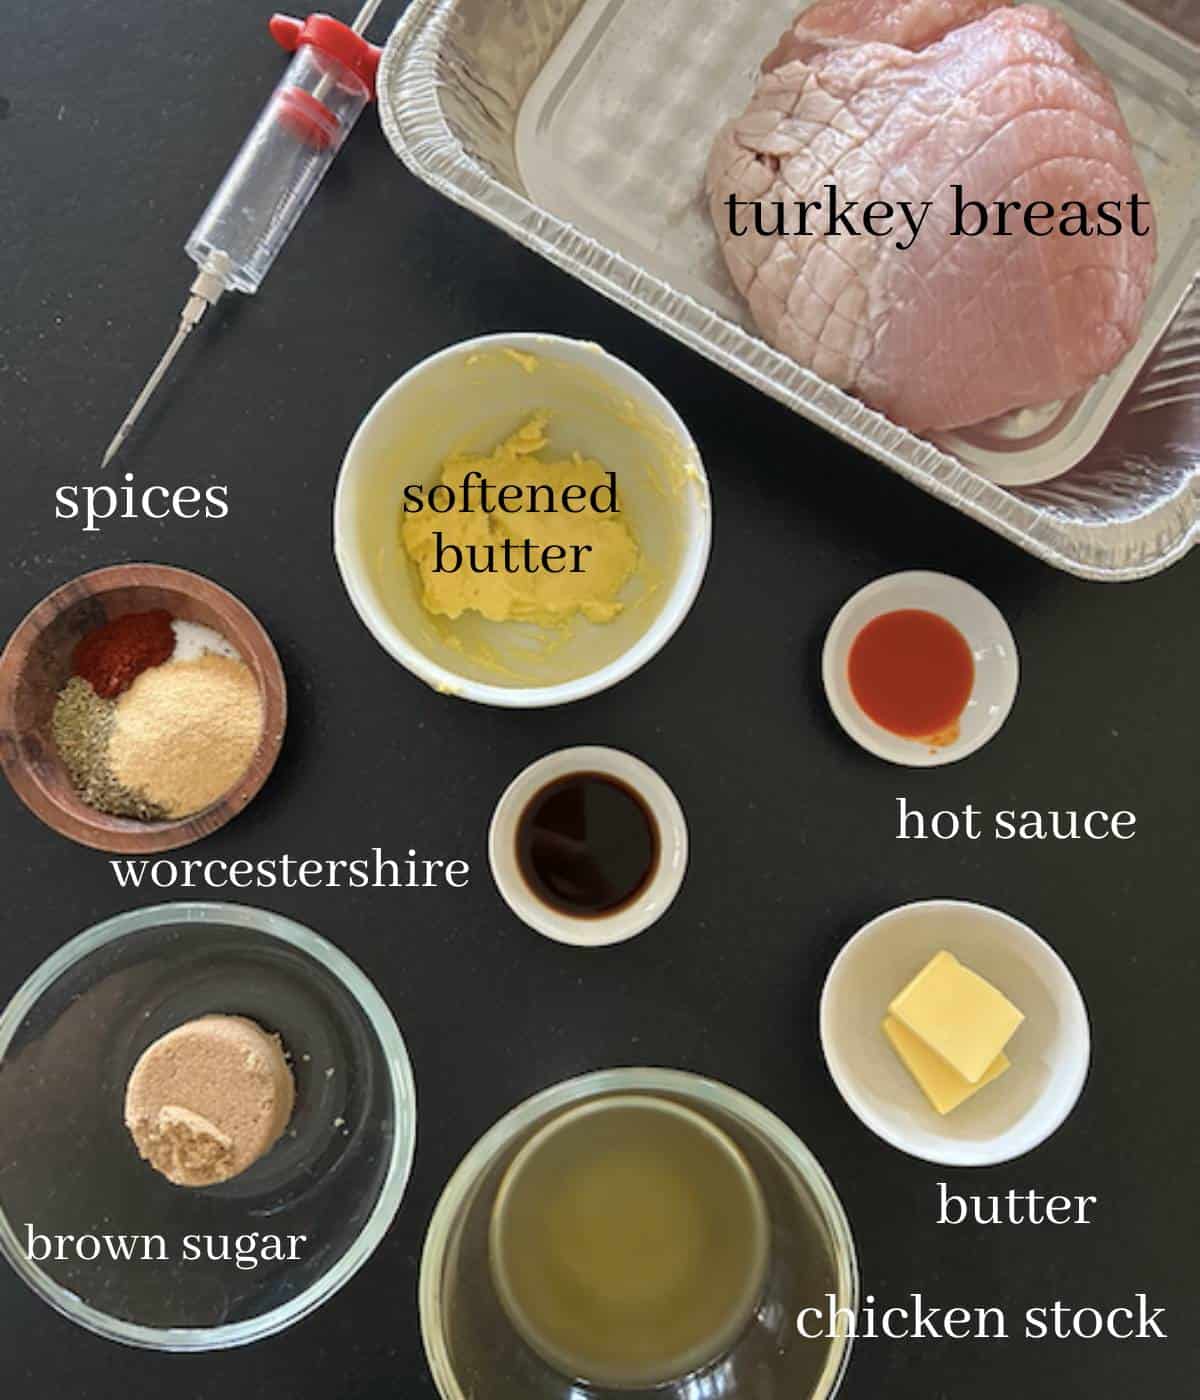 Ingredients for smoked turkey breast.